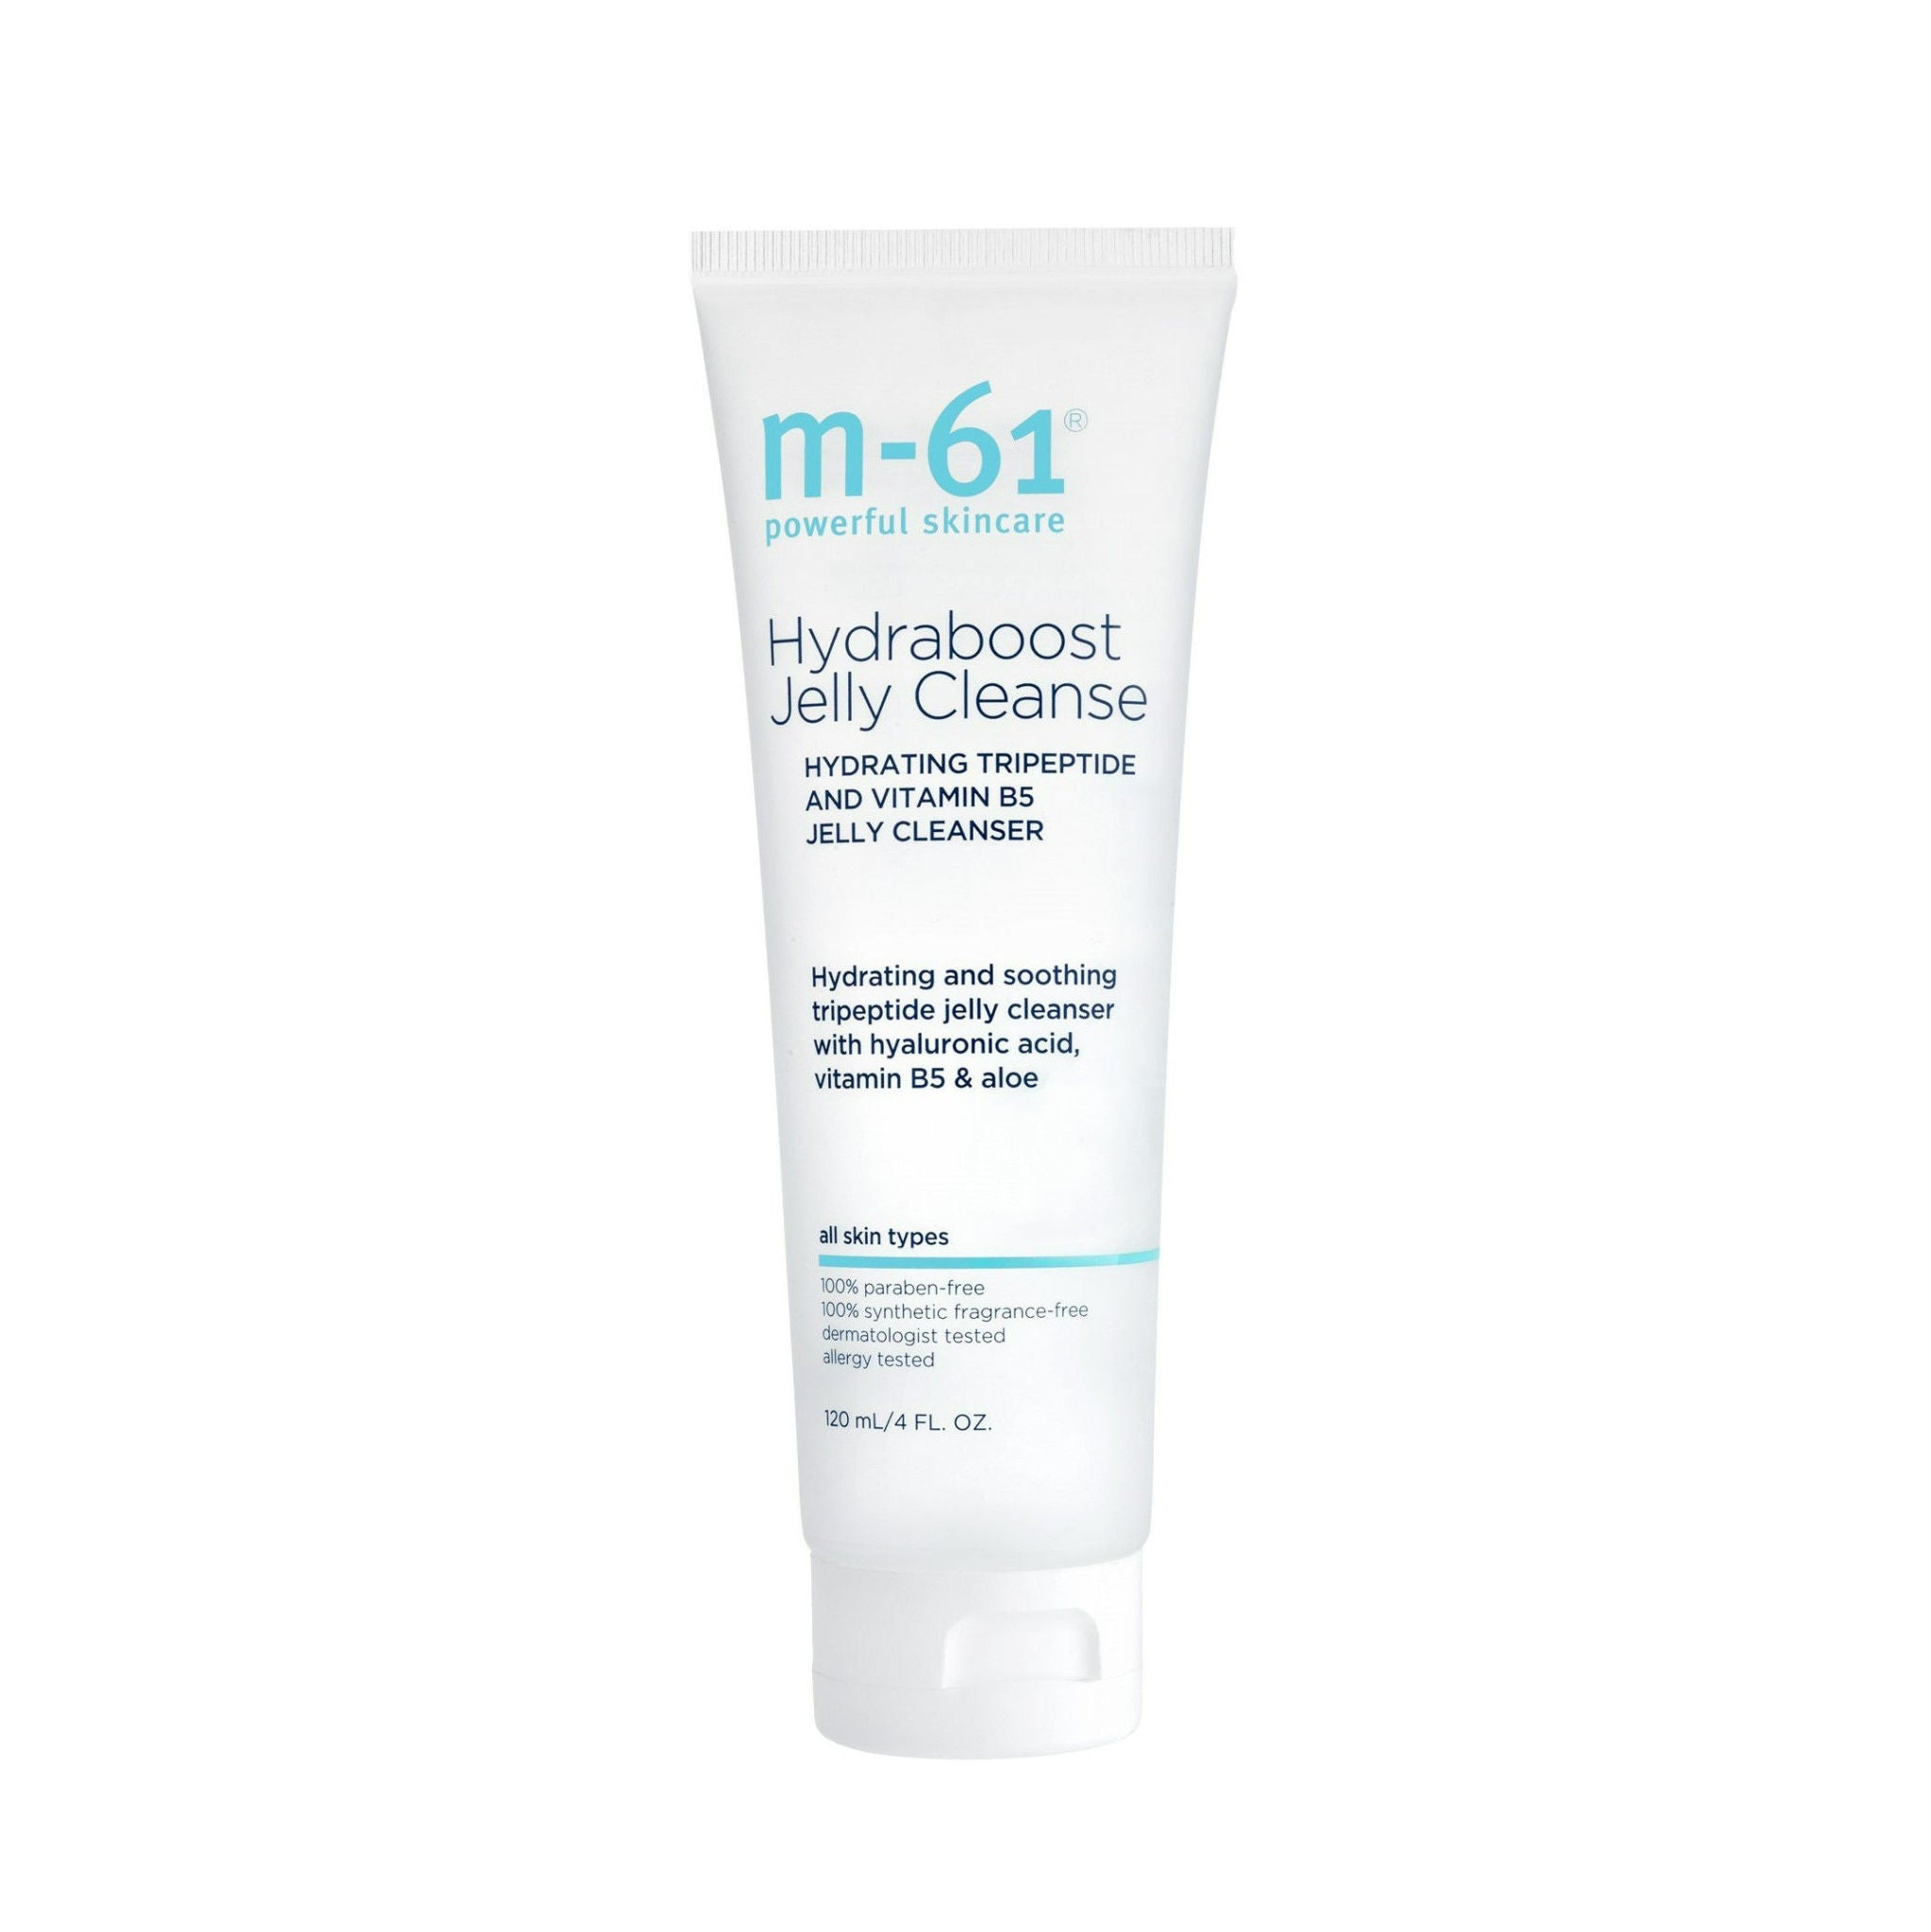 M-61 Hydraboost Jelly Cleanse Size variant: 4 fl oz | 120 ml main image.